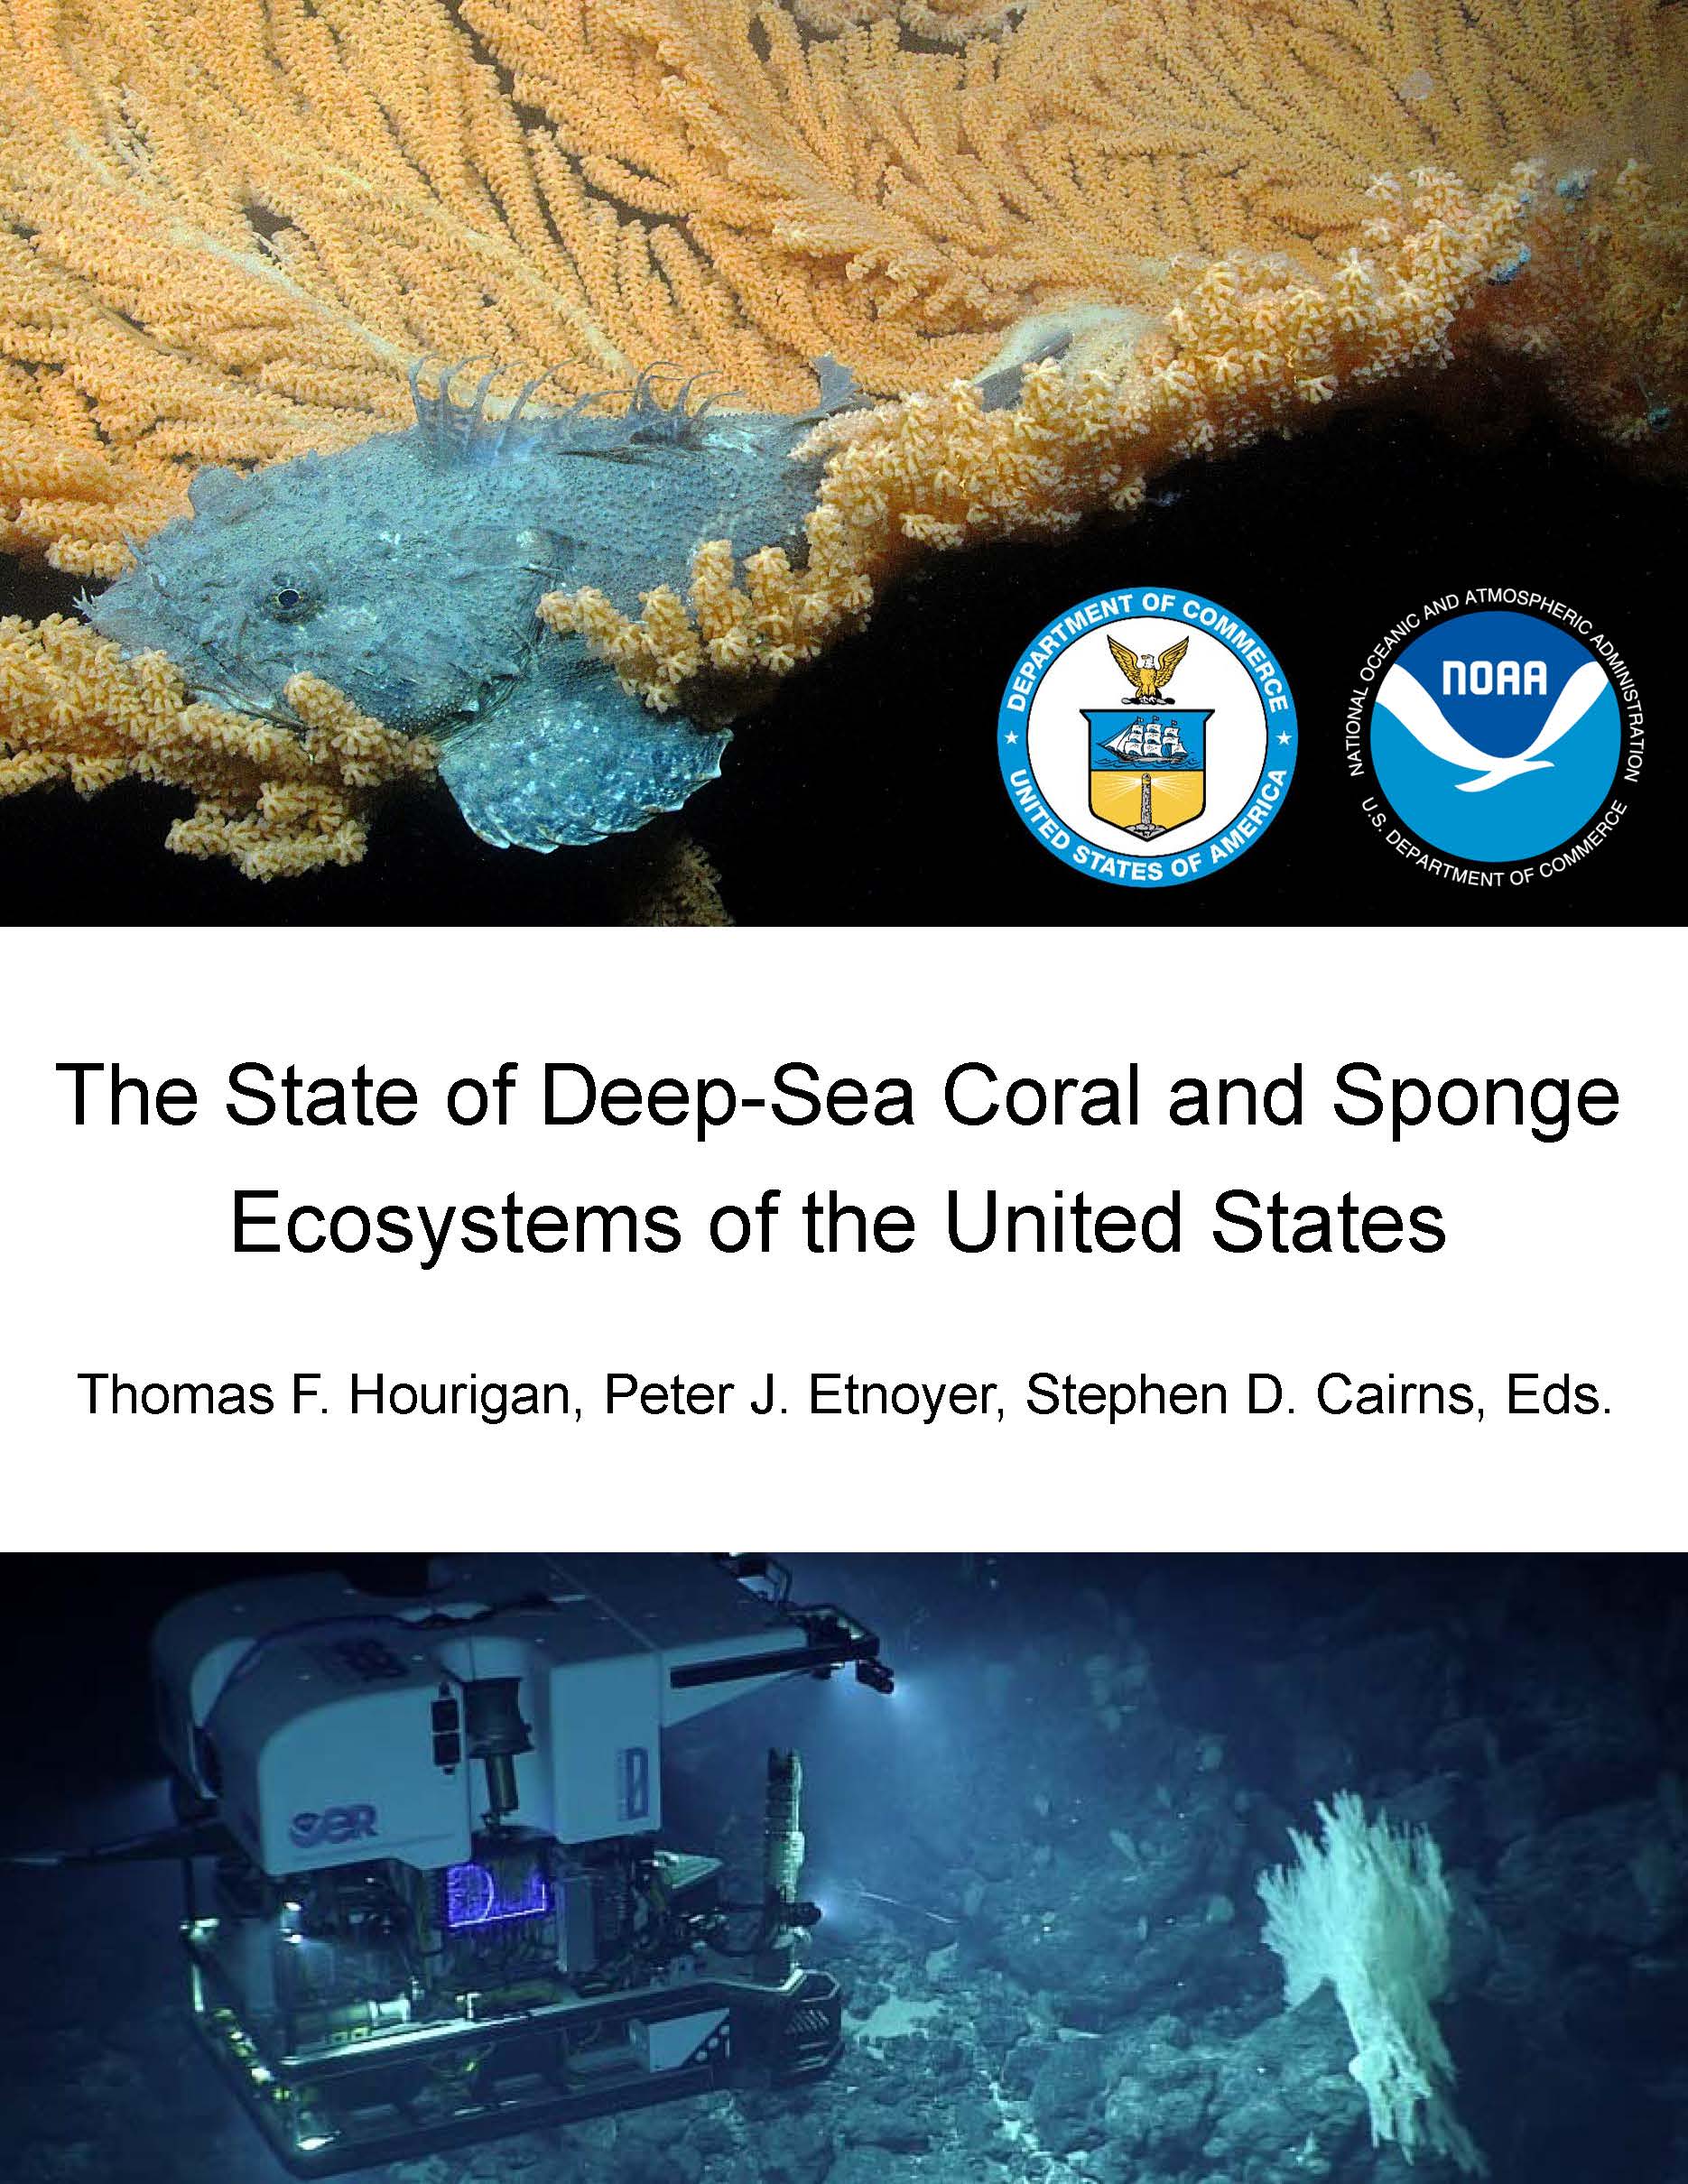 Cover : The State of Deep-Sea Coral and Sponge Ecosystems of the United States